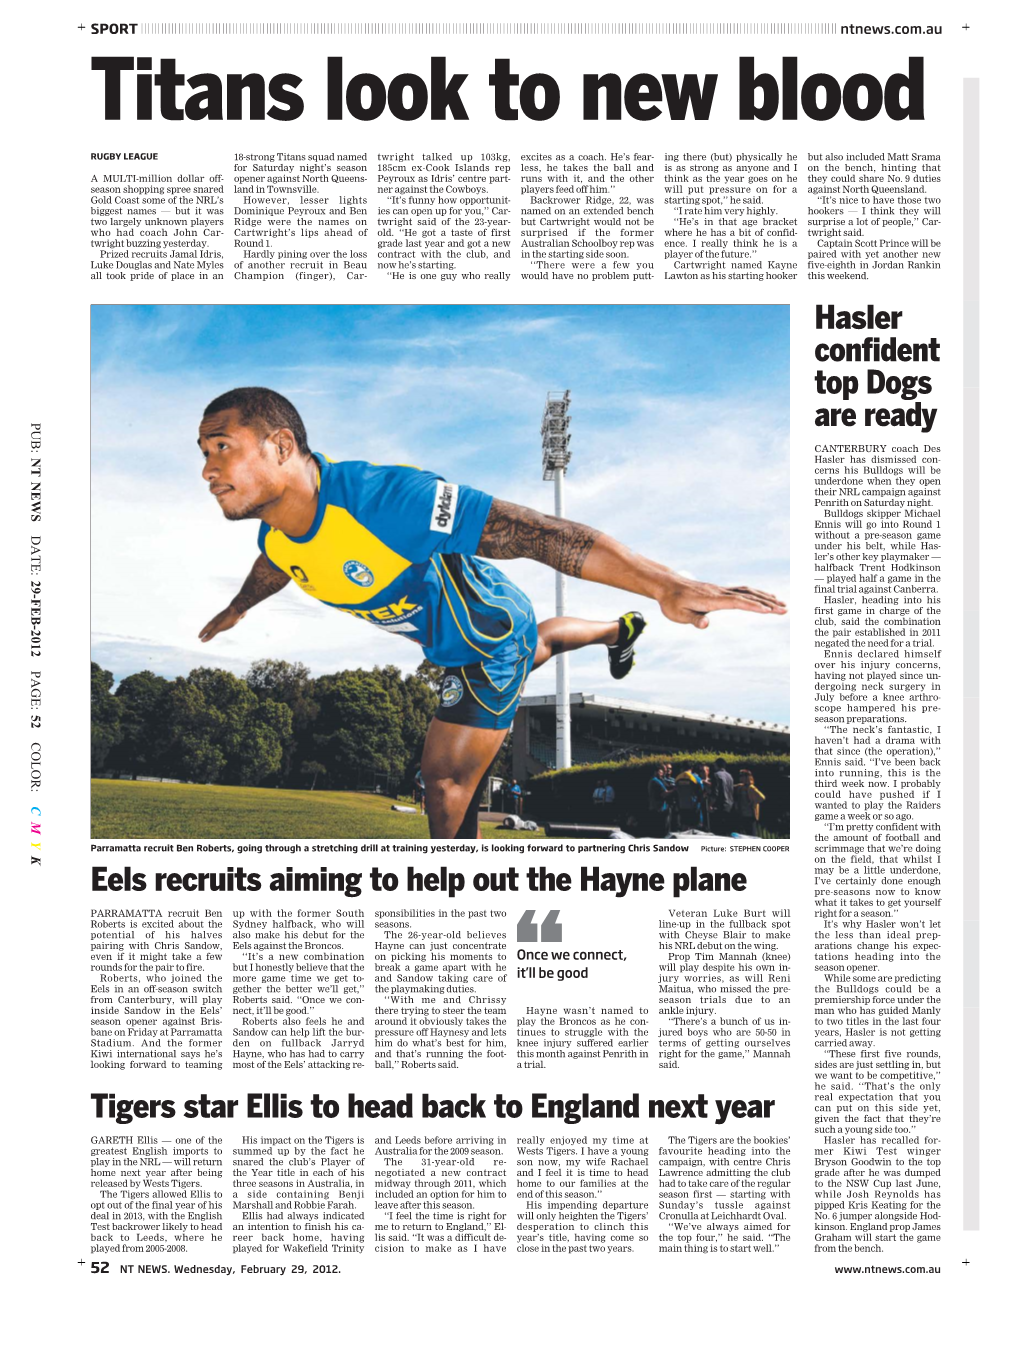 Hasler Confident Top Dogs Are Ready Tigers Star Ellis to Head Back To